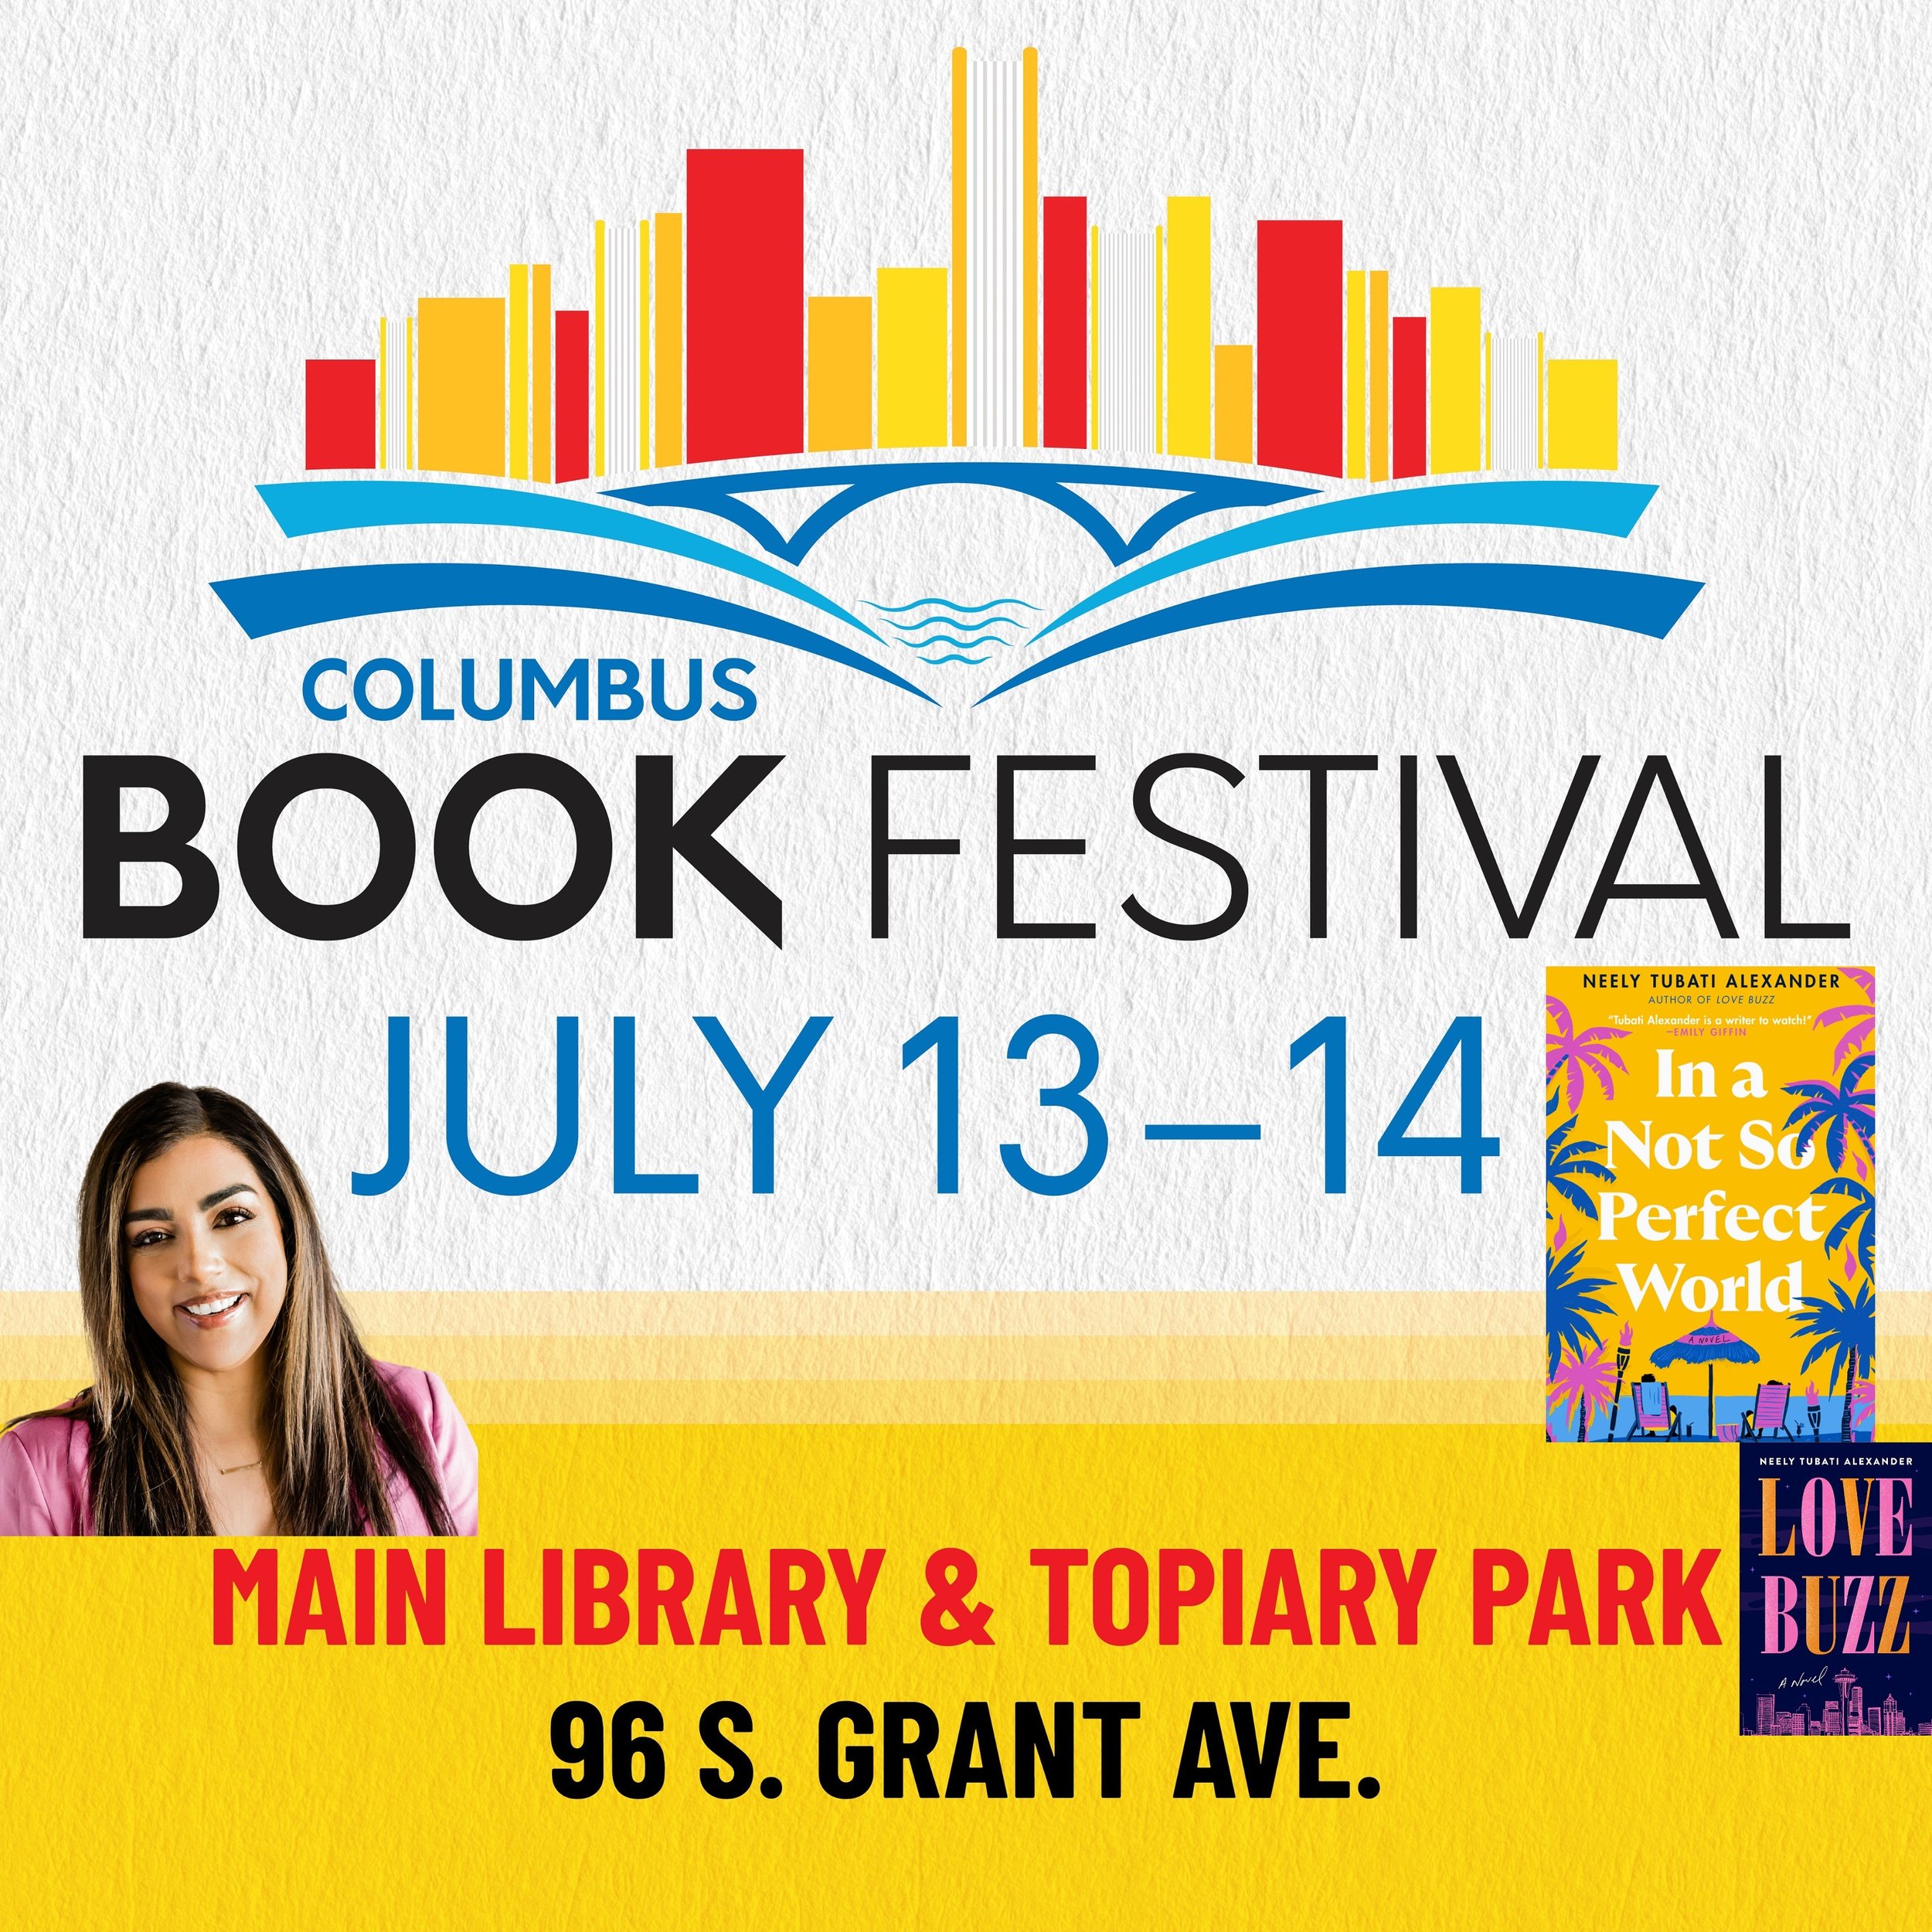 I am so excited to be able to say I will be returning to the Columbus Book Festival in Ohio this summer! 

With all the *ahem* talk recently of book festivals/conferences, let me just say - I attended Columbus last year as a debut author for their fi